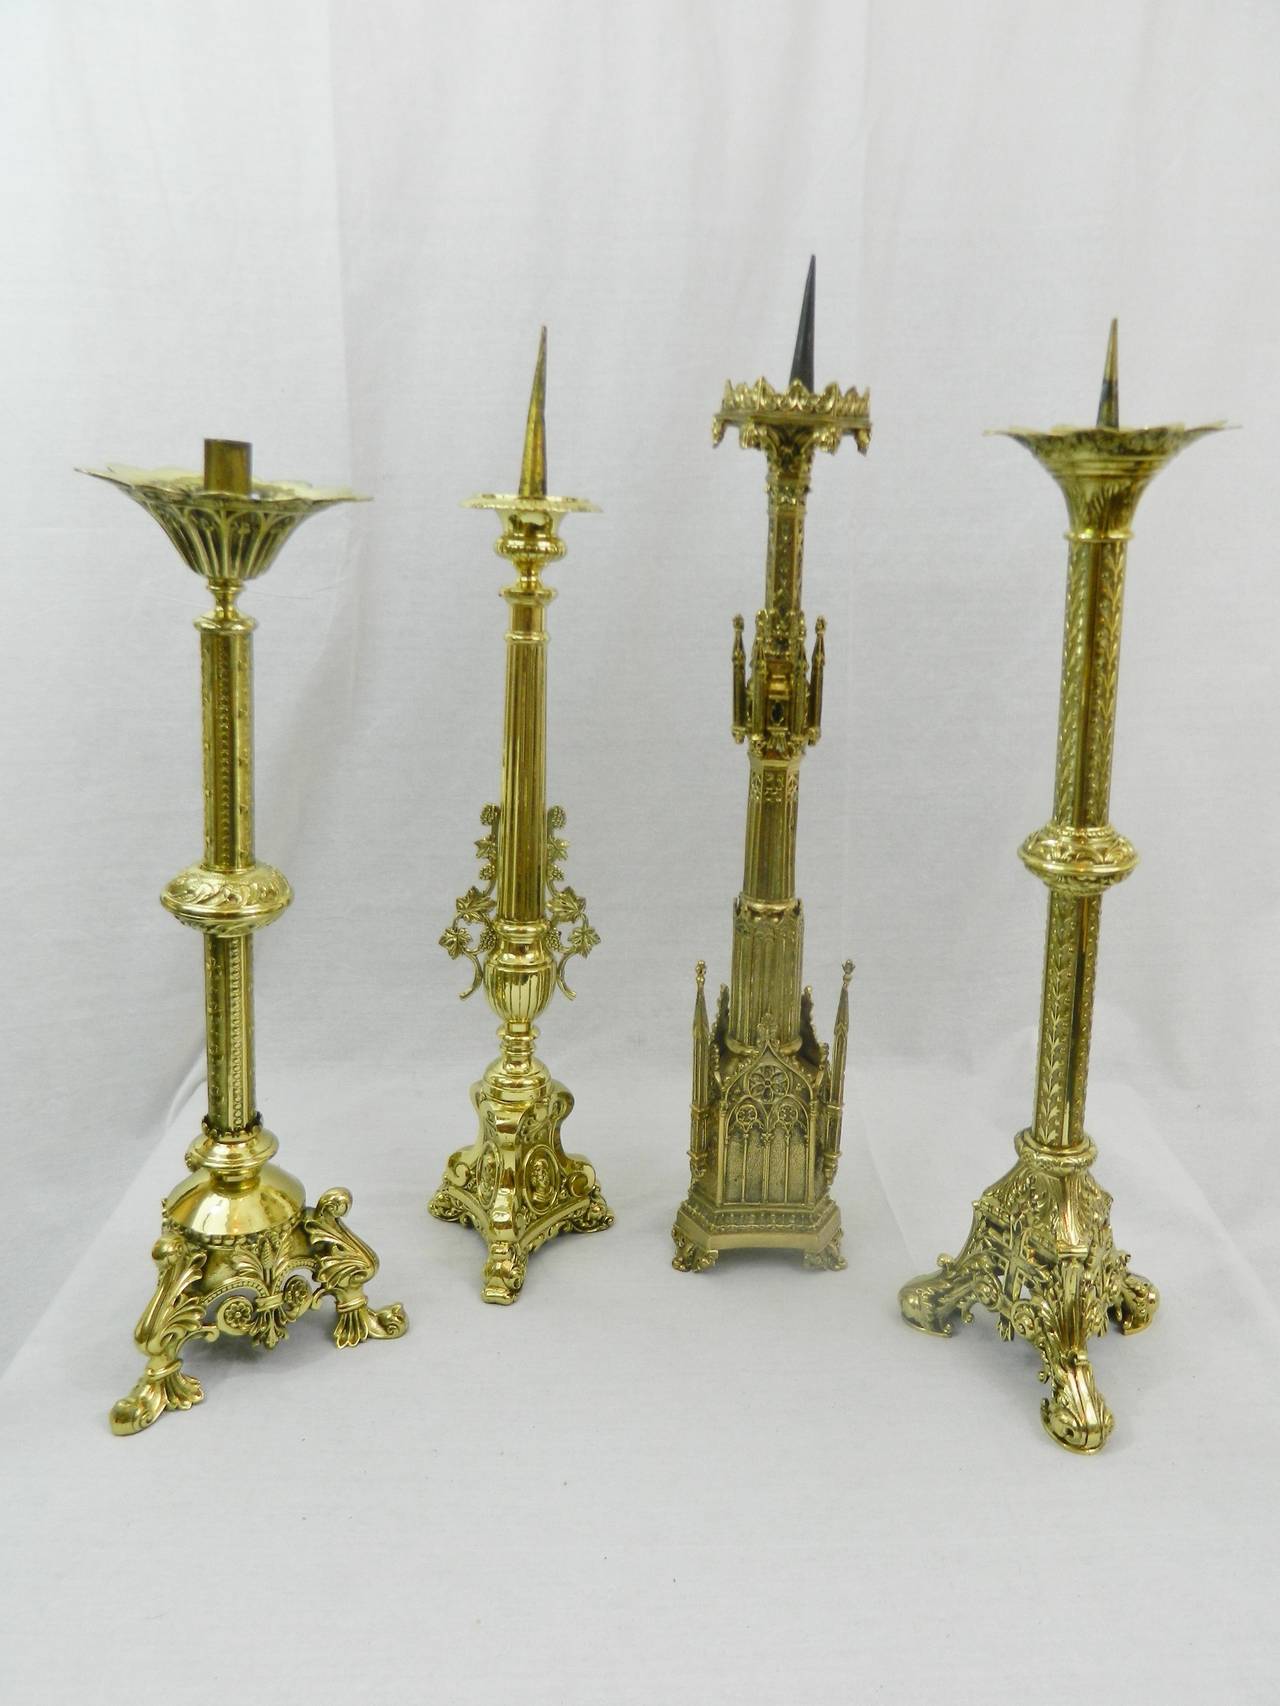 French 19th Century Polished Brass Decorative Prickets or Candlesticks